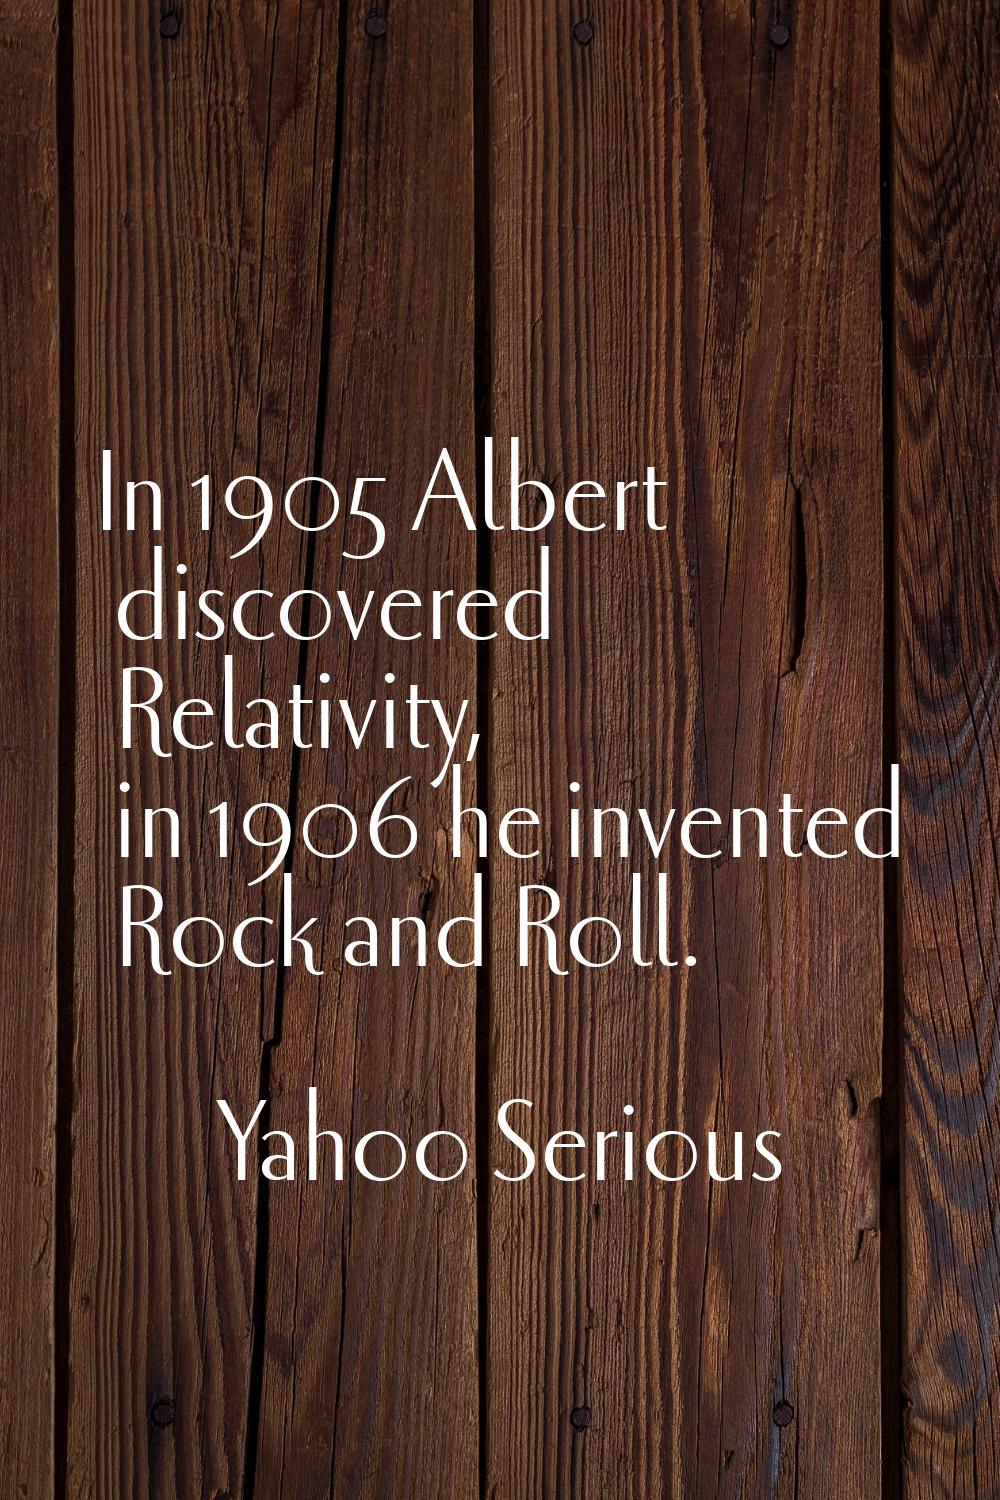 In 1905 Albert discovered Relativity, in 1906 he invented Rock and Roll.